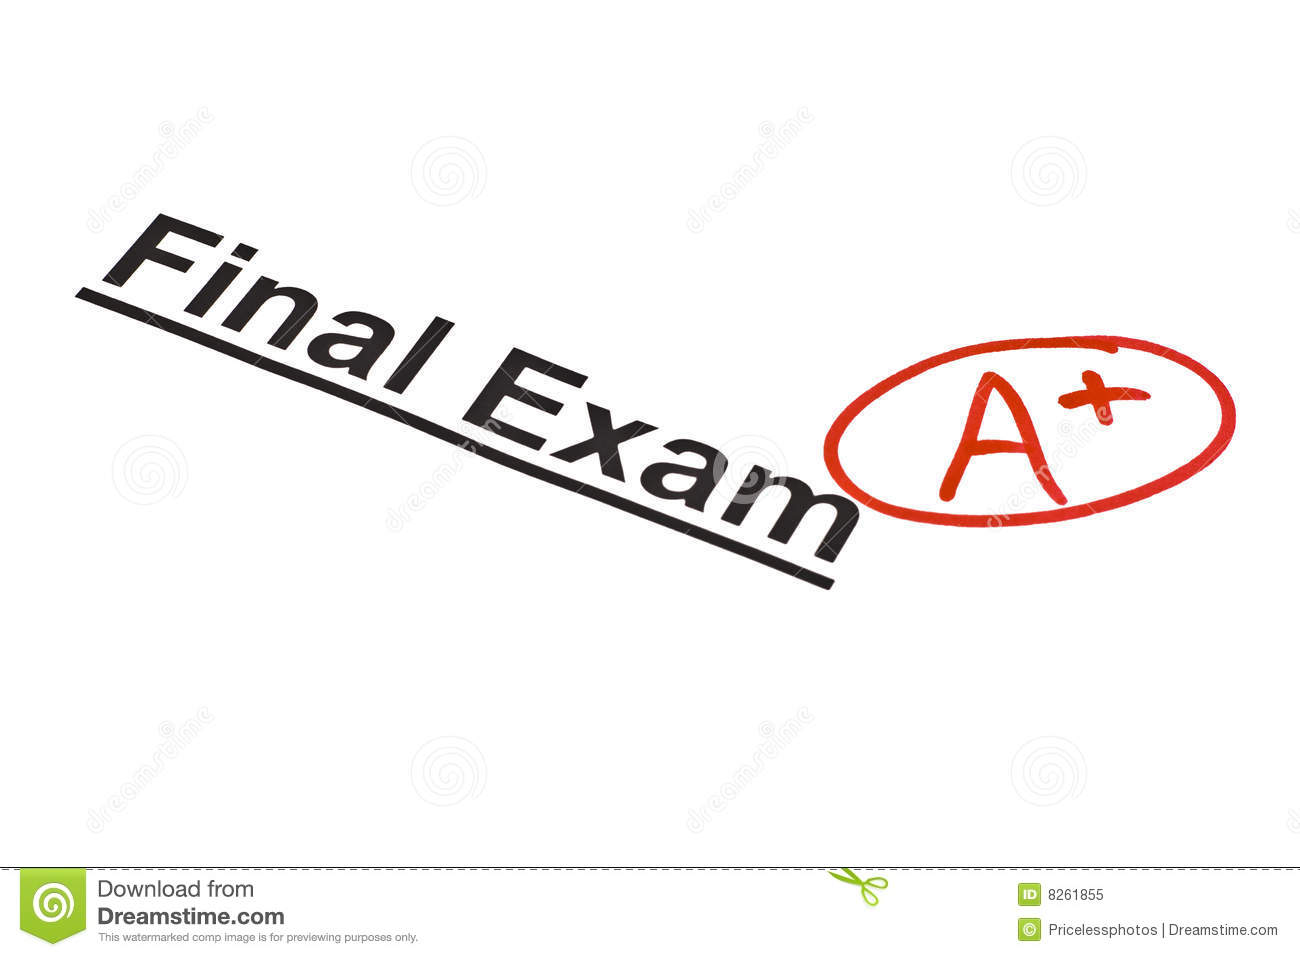 Final Exam Marked With A  Royalty Free Stock Photo   Image  8261855